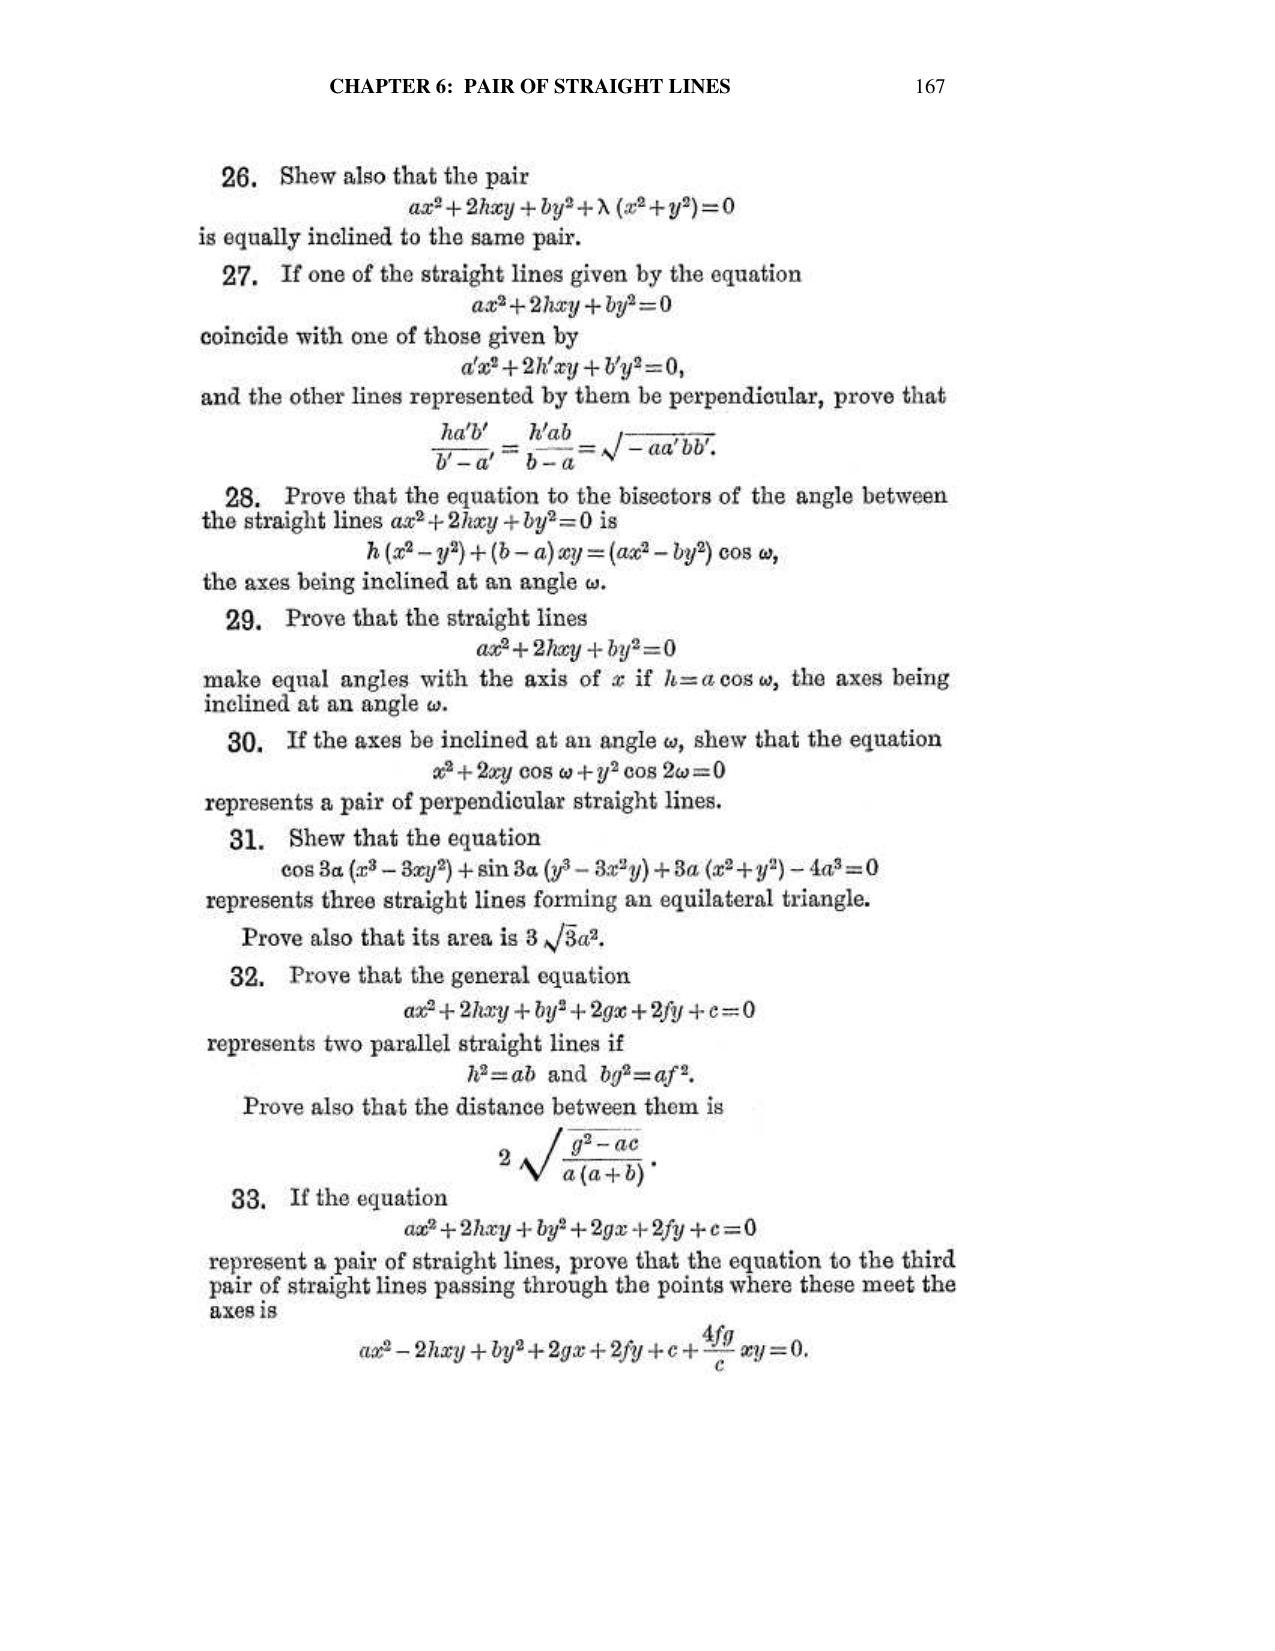 Chapter 6: On Equations Representing Two or More Straight Lines - SL Loney Solutions: The Elements of Coordinate Geometry - Page 28